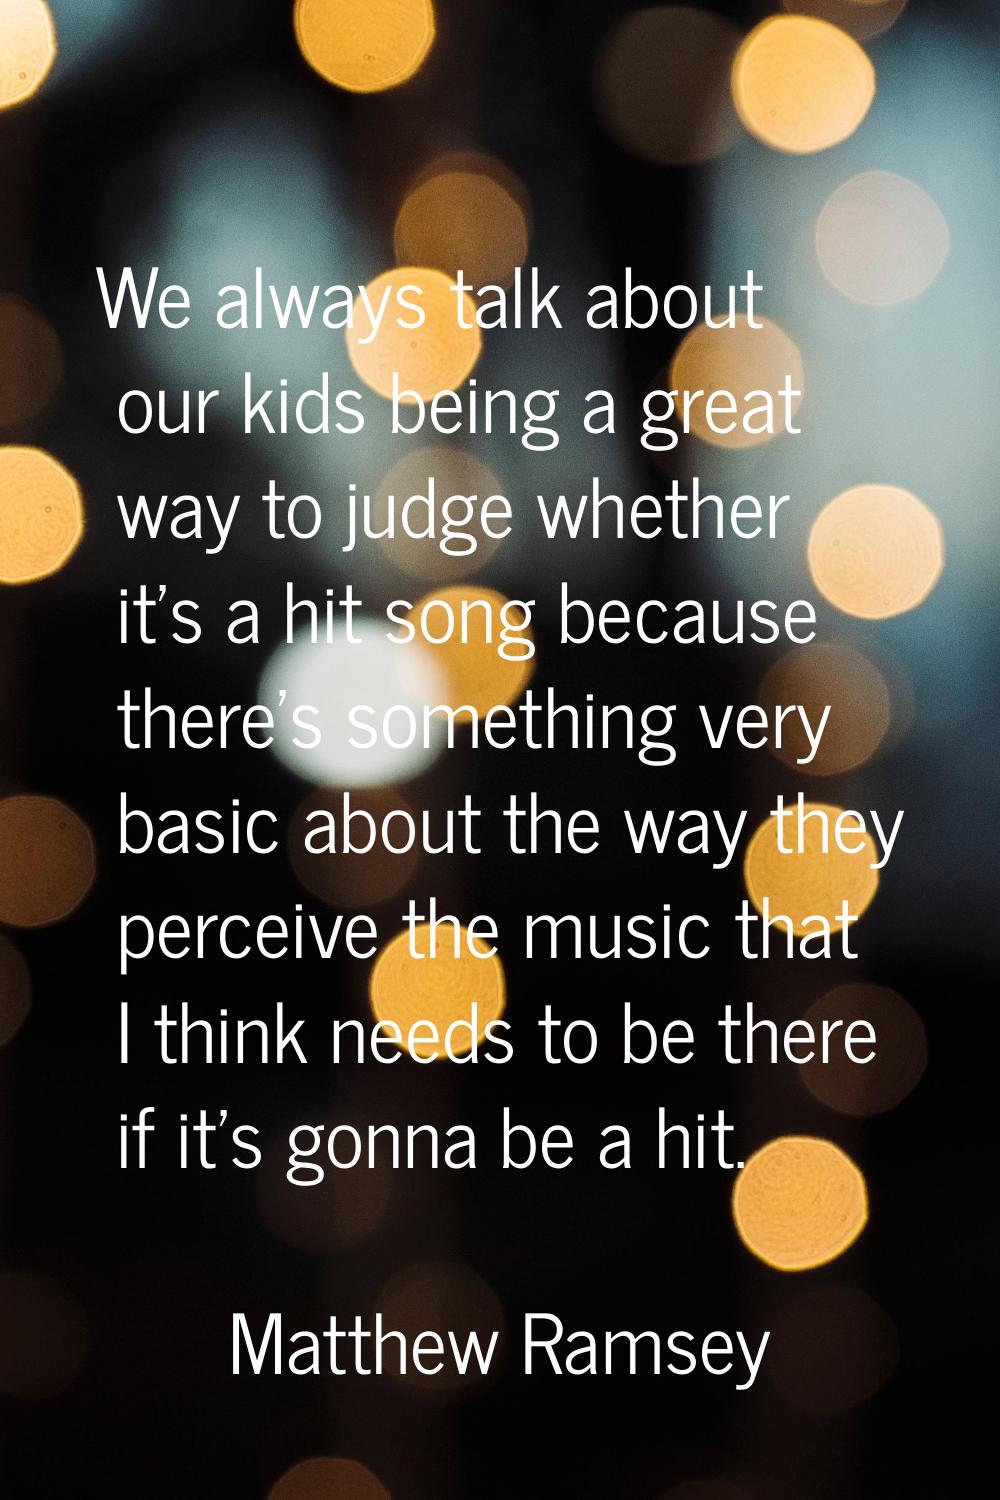 We always talk about our kids being a great way to judge whether it's a hit song because there's so